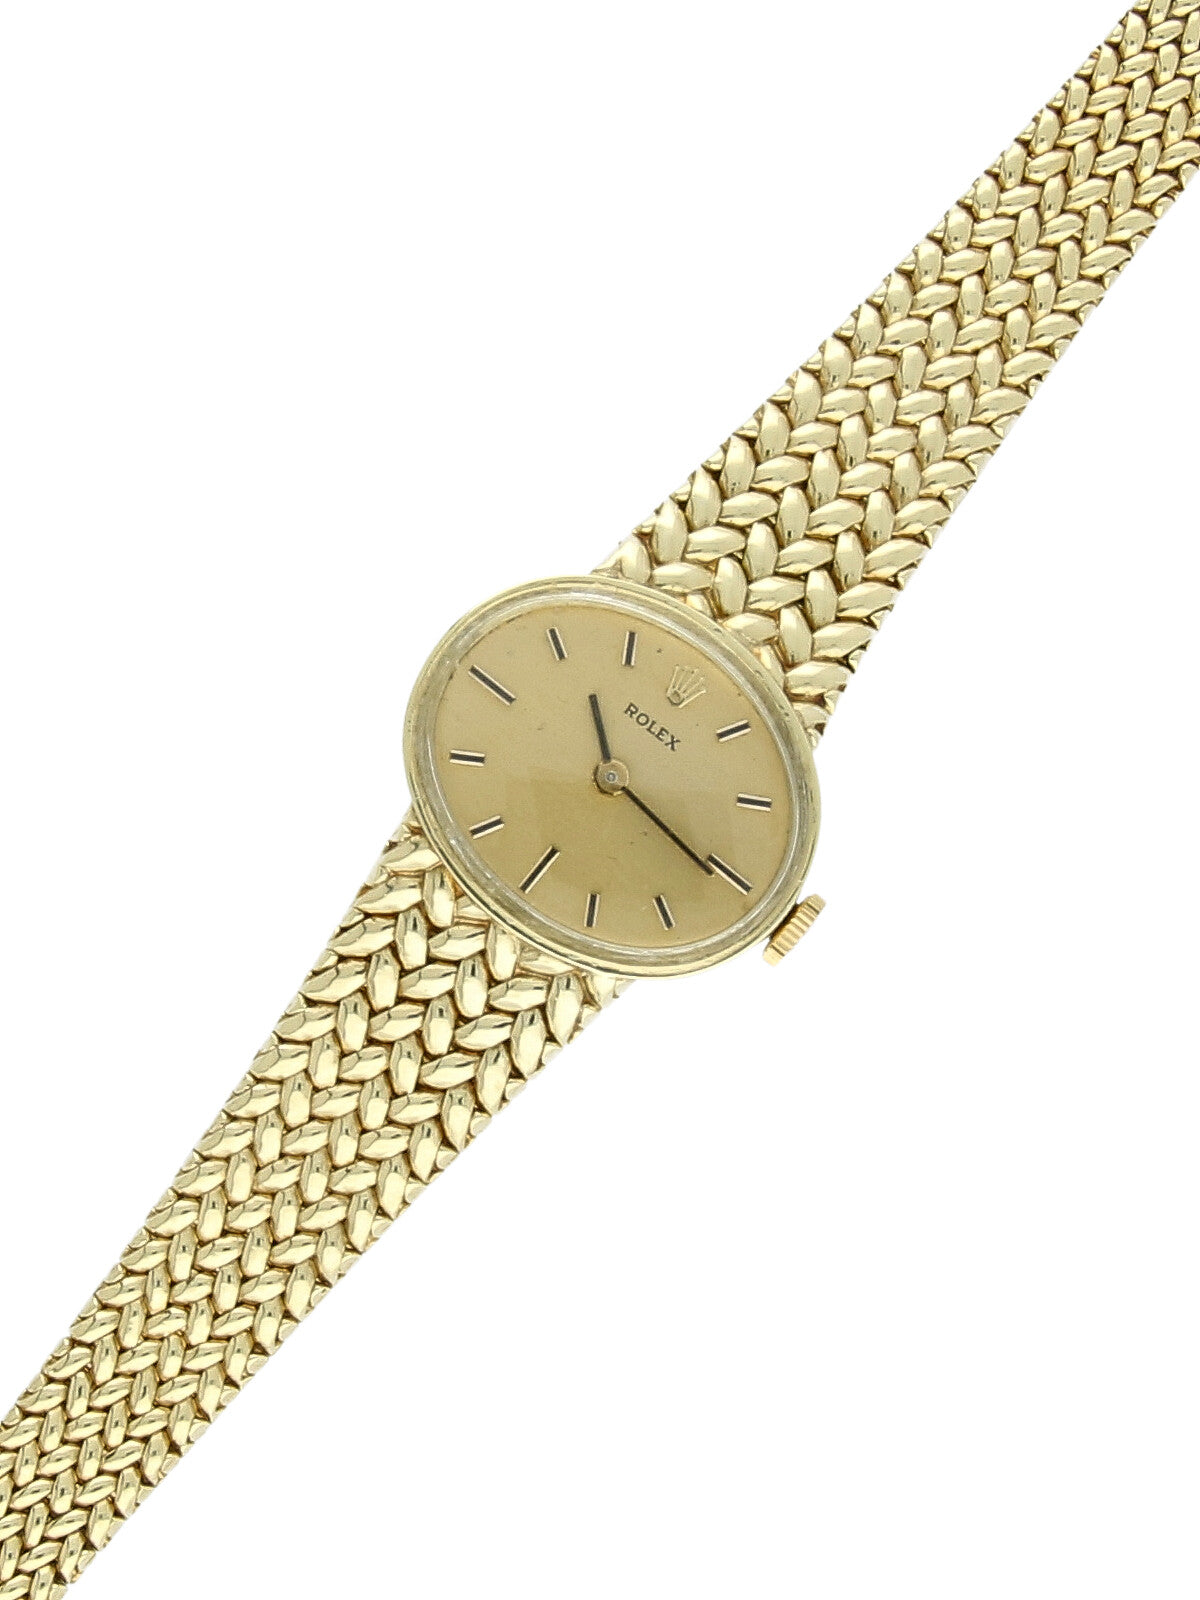 Pre Owned Rolex Oval 14ct Yellow Gold Manual Wind 23x17mm Dress Watch on Bracelet